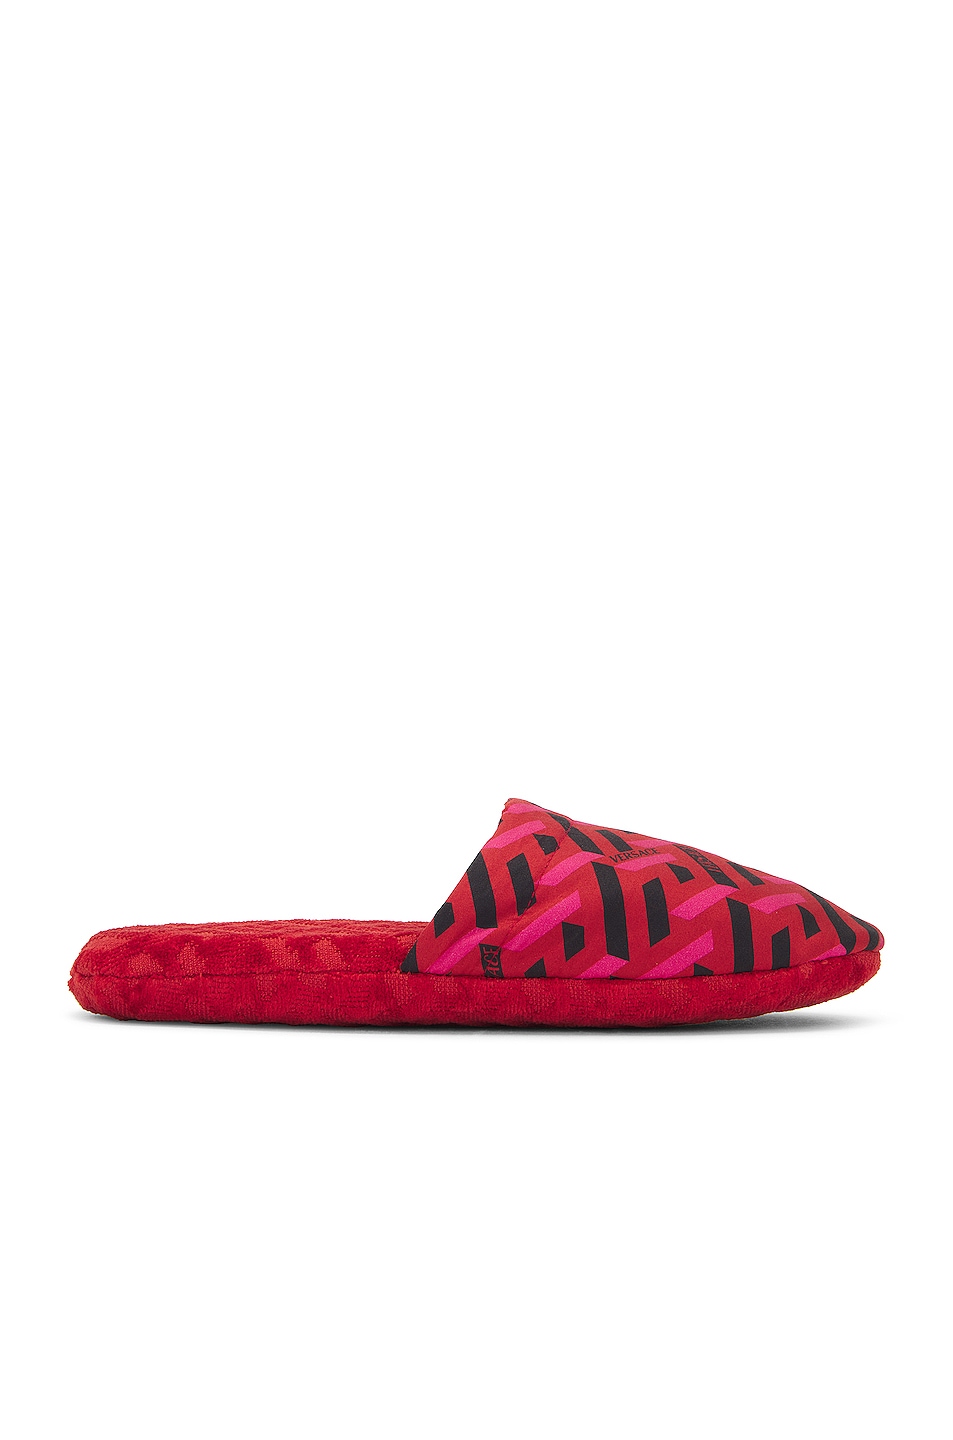 Image 1 of VERSACE Greca Signature House Slippers in Parade Red & Fuchsia